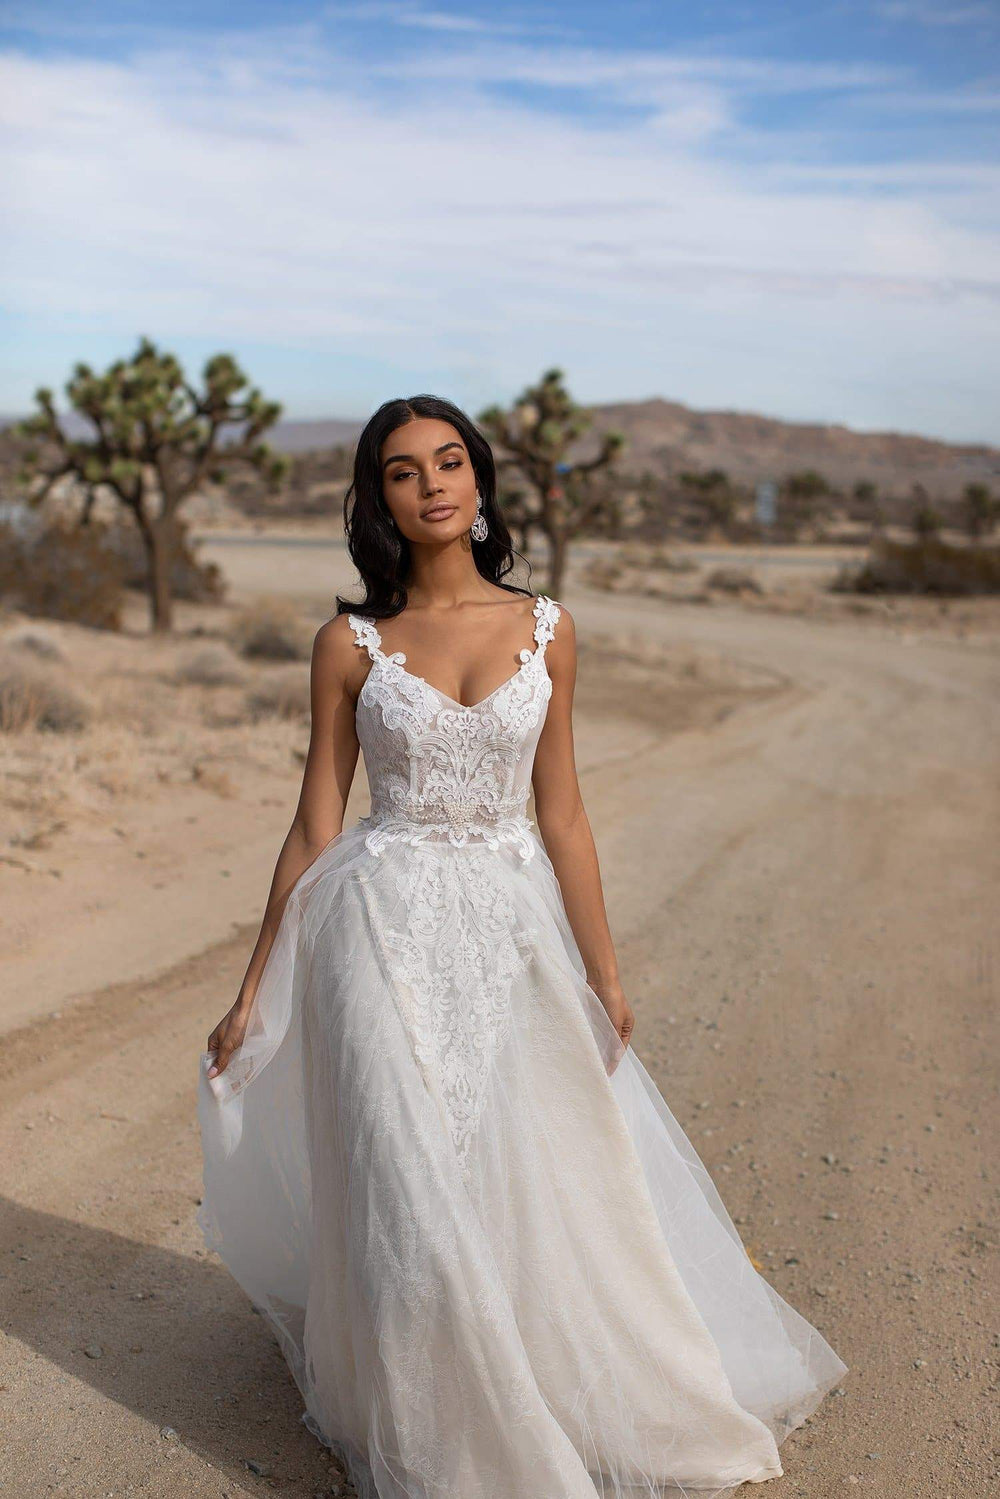 A&N Gaia - White Boho Bridal Gown with Lace Bodice & Tulle Skirt